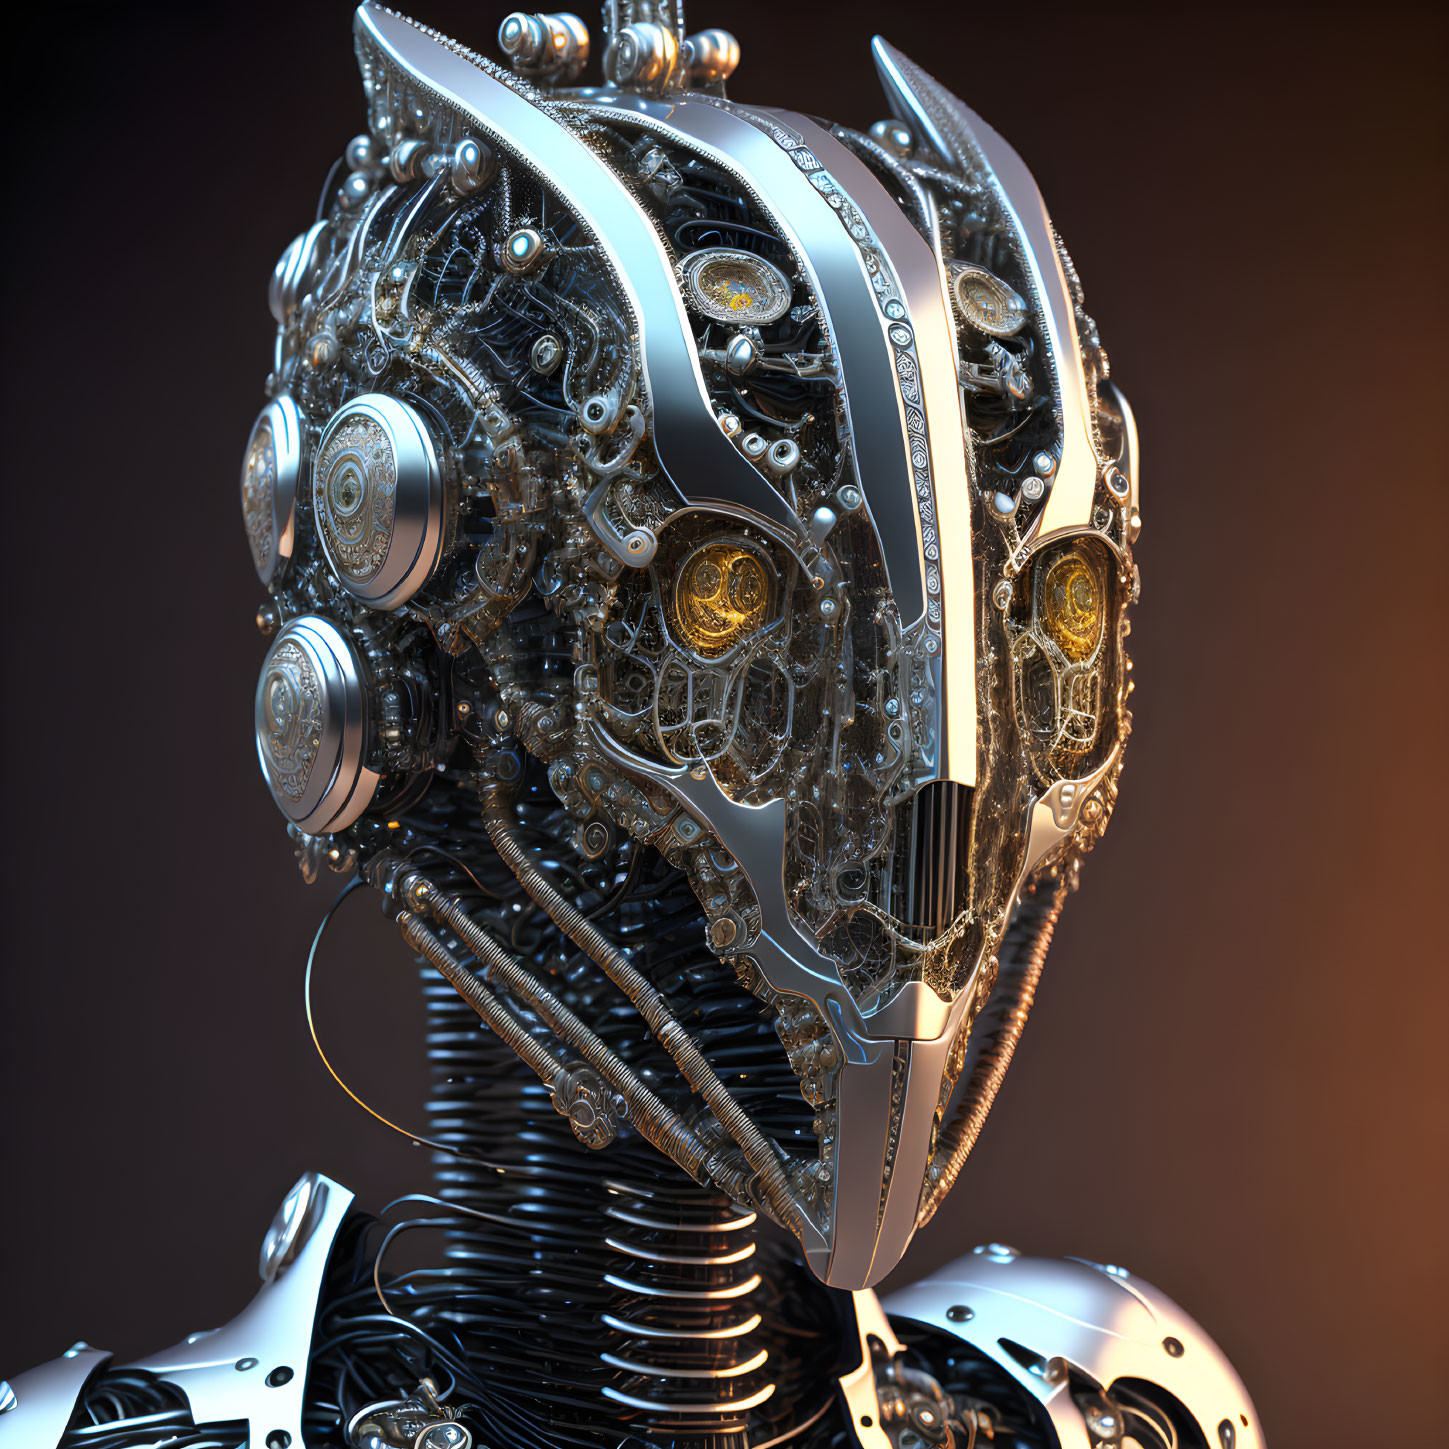 Detailed Robotic Head with Silver, White, and Golden Mechanical Parts